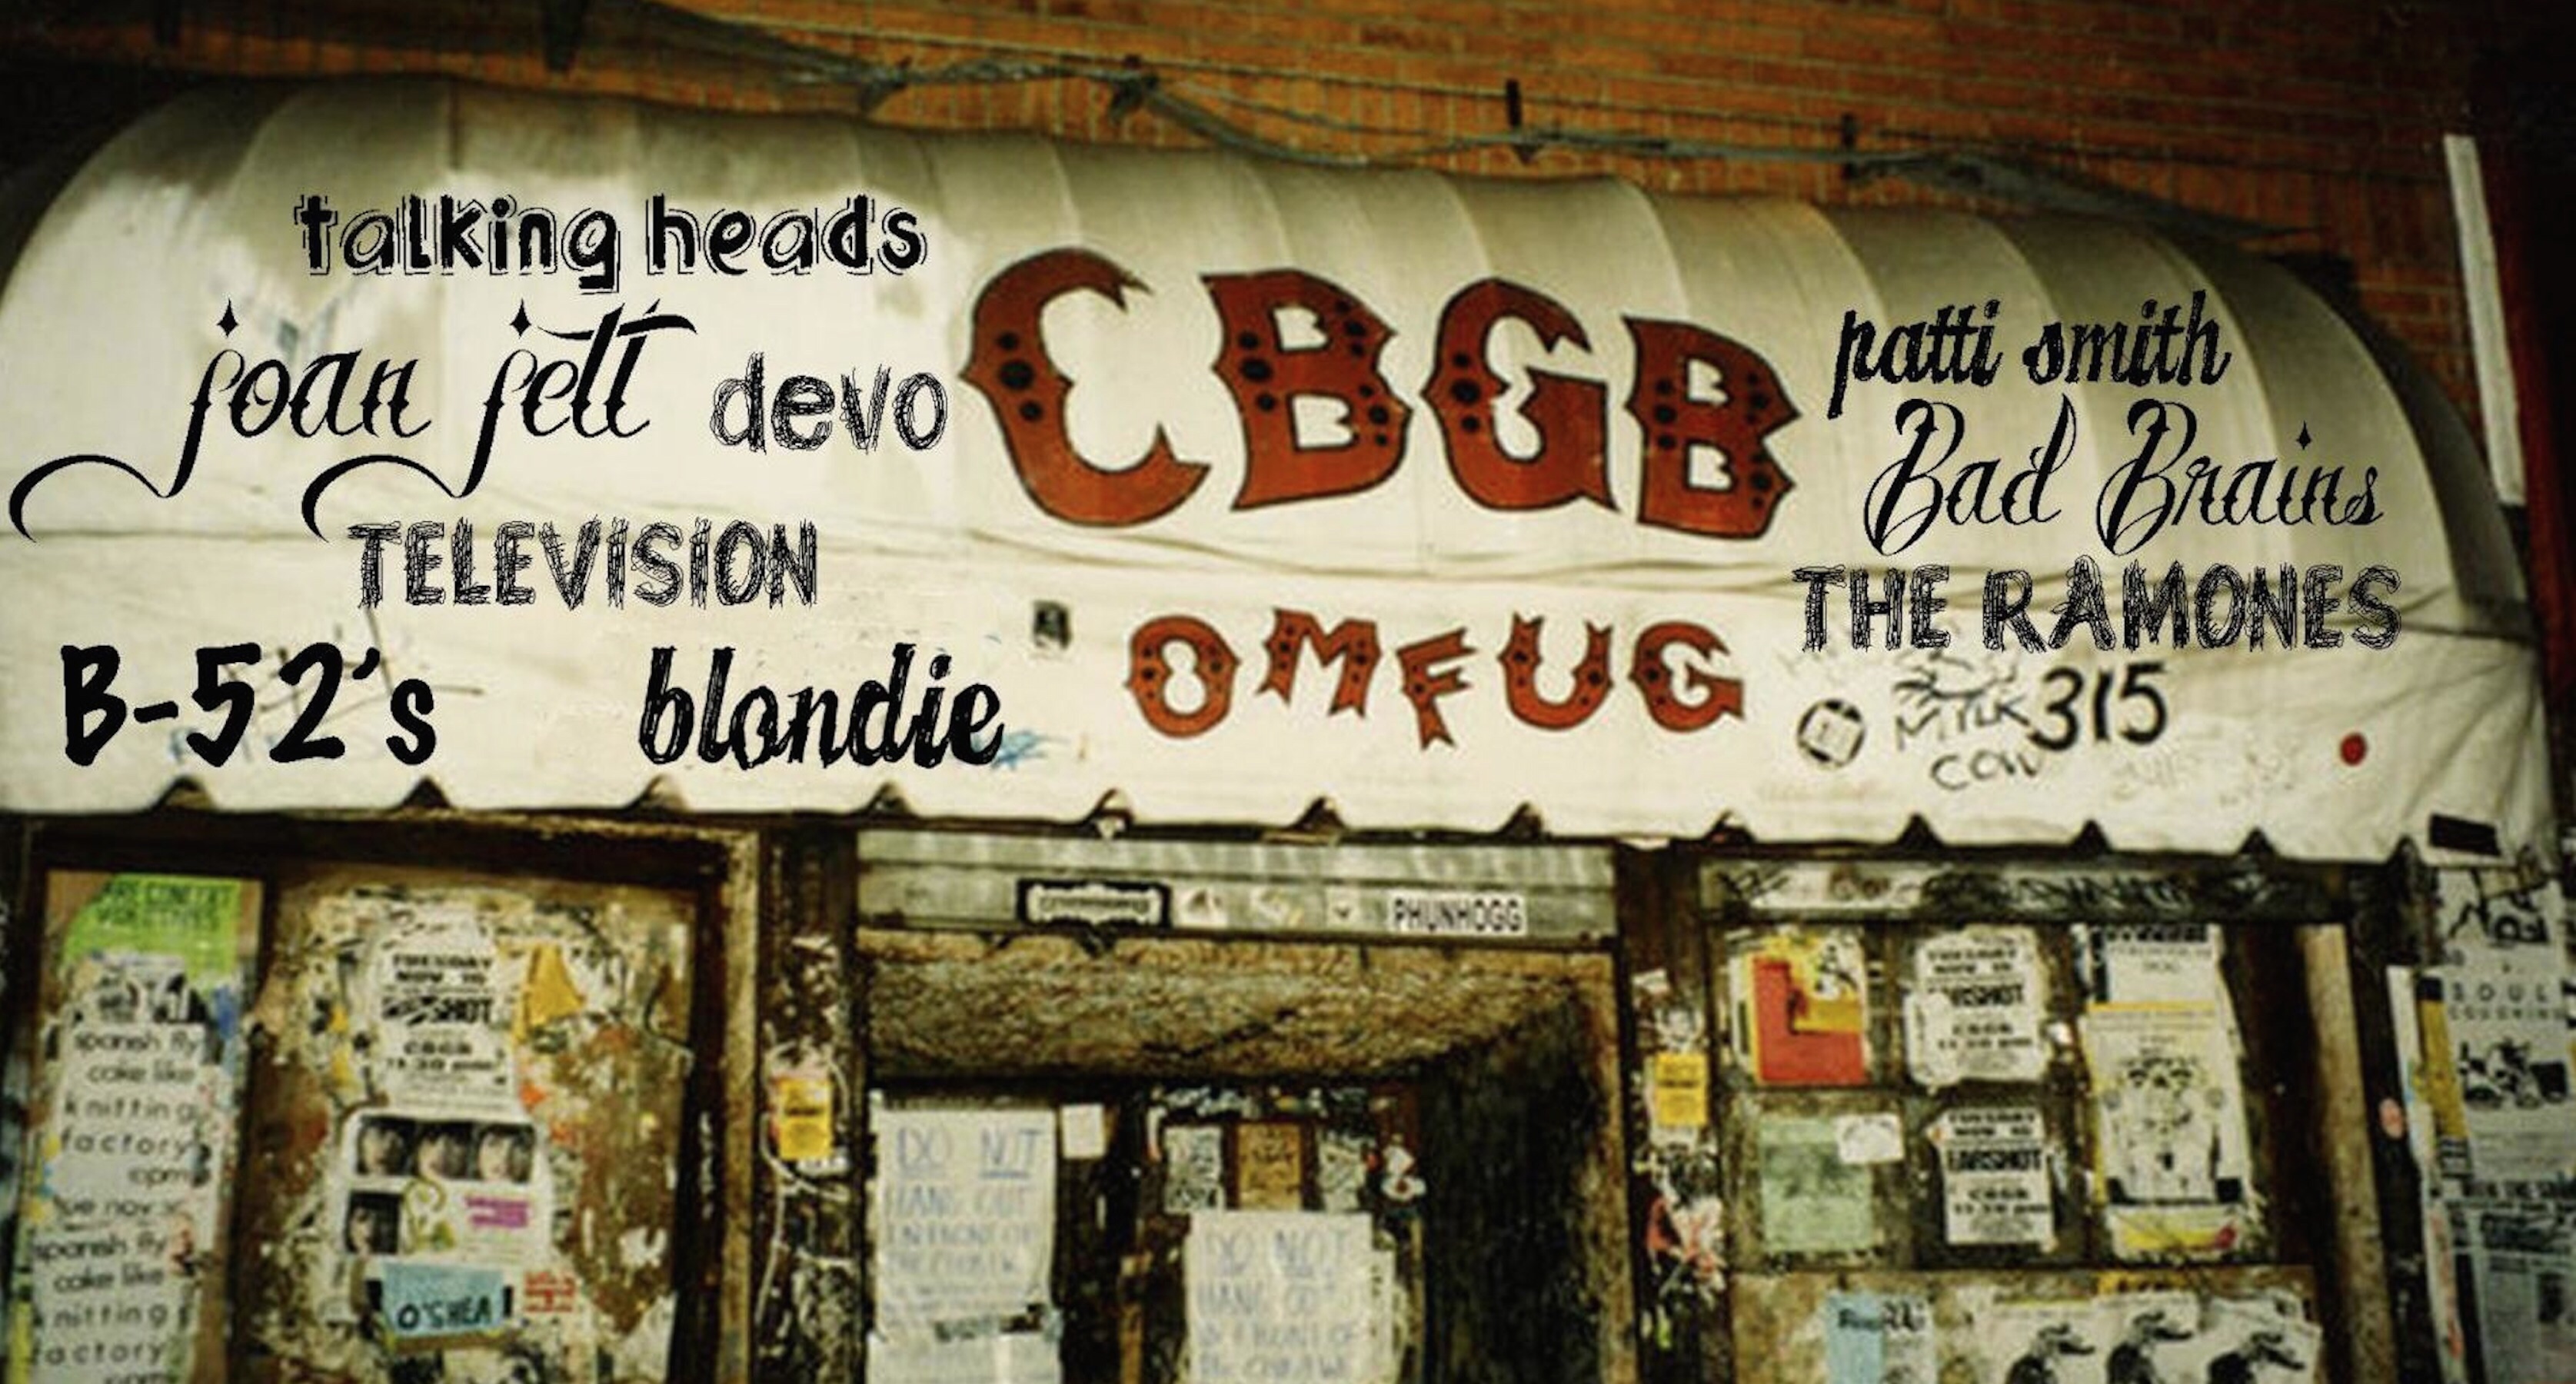 Cbgb Goes From Rock Club To Airport Eatery Riffyou